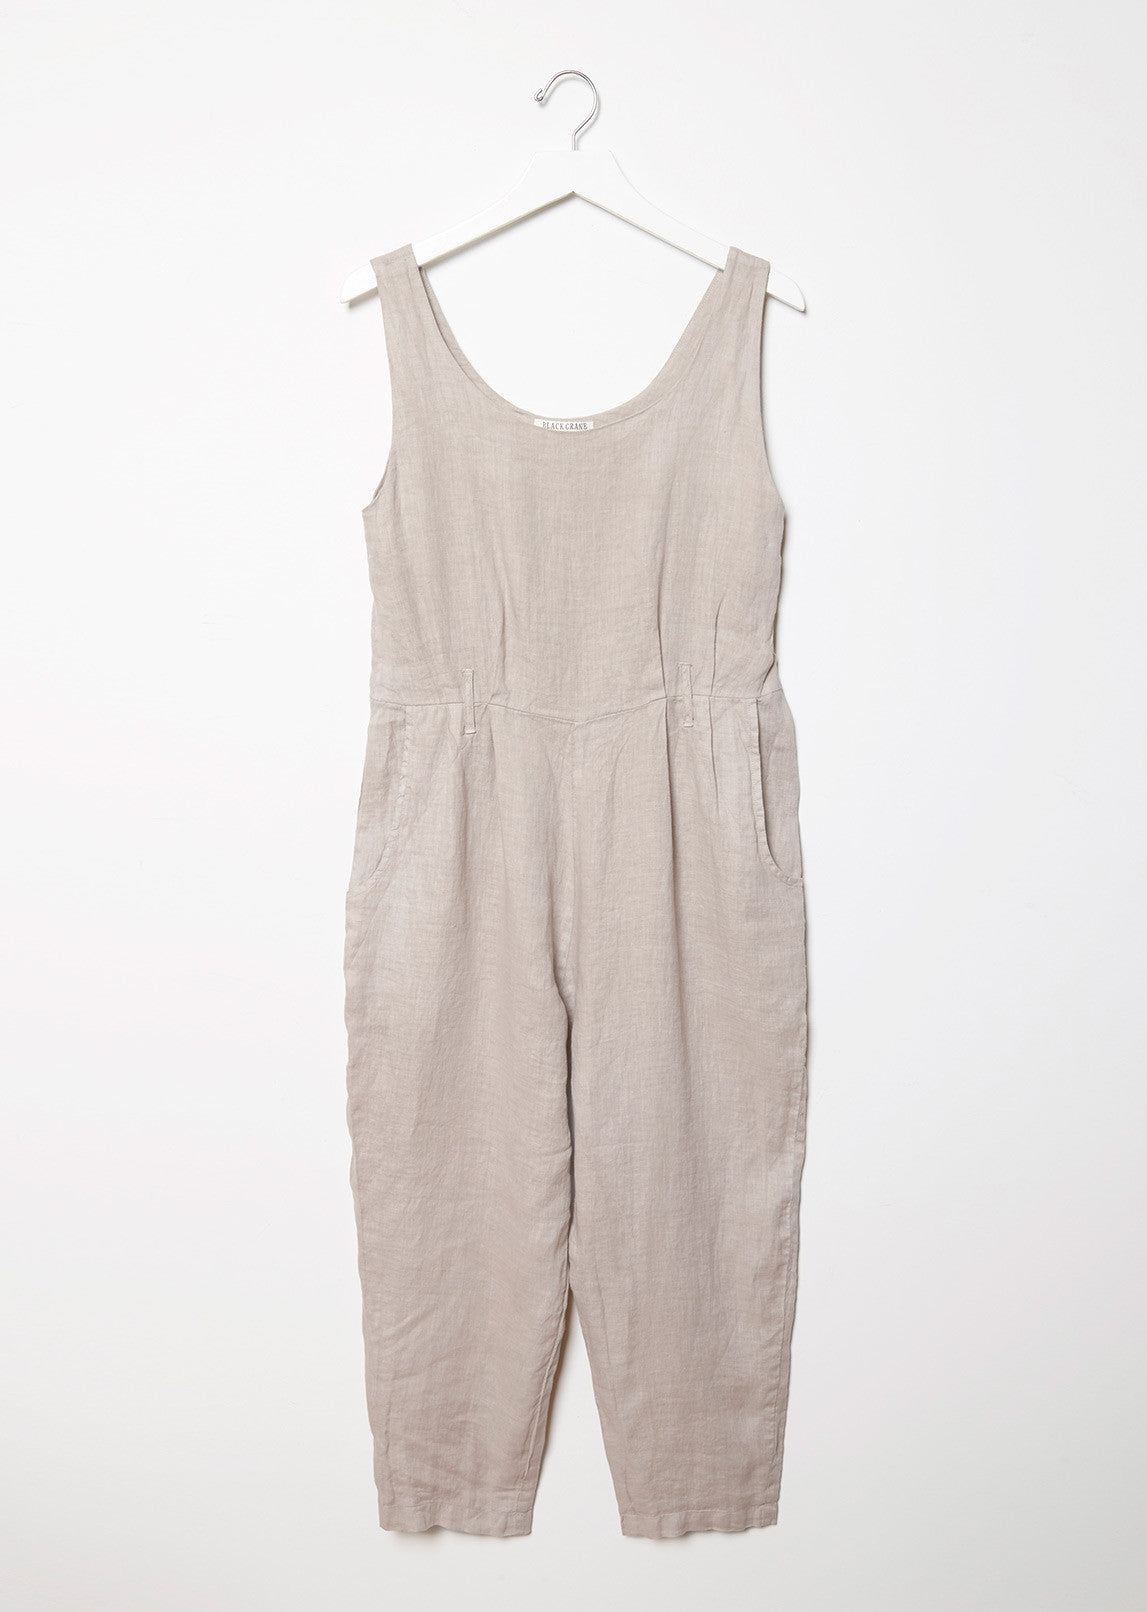 Kapoeta by Ambica - Black linen dungarees with beaded accents